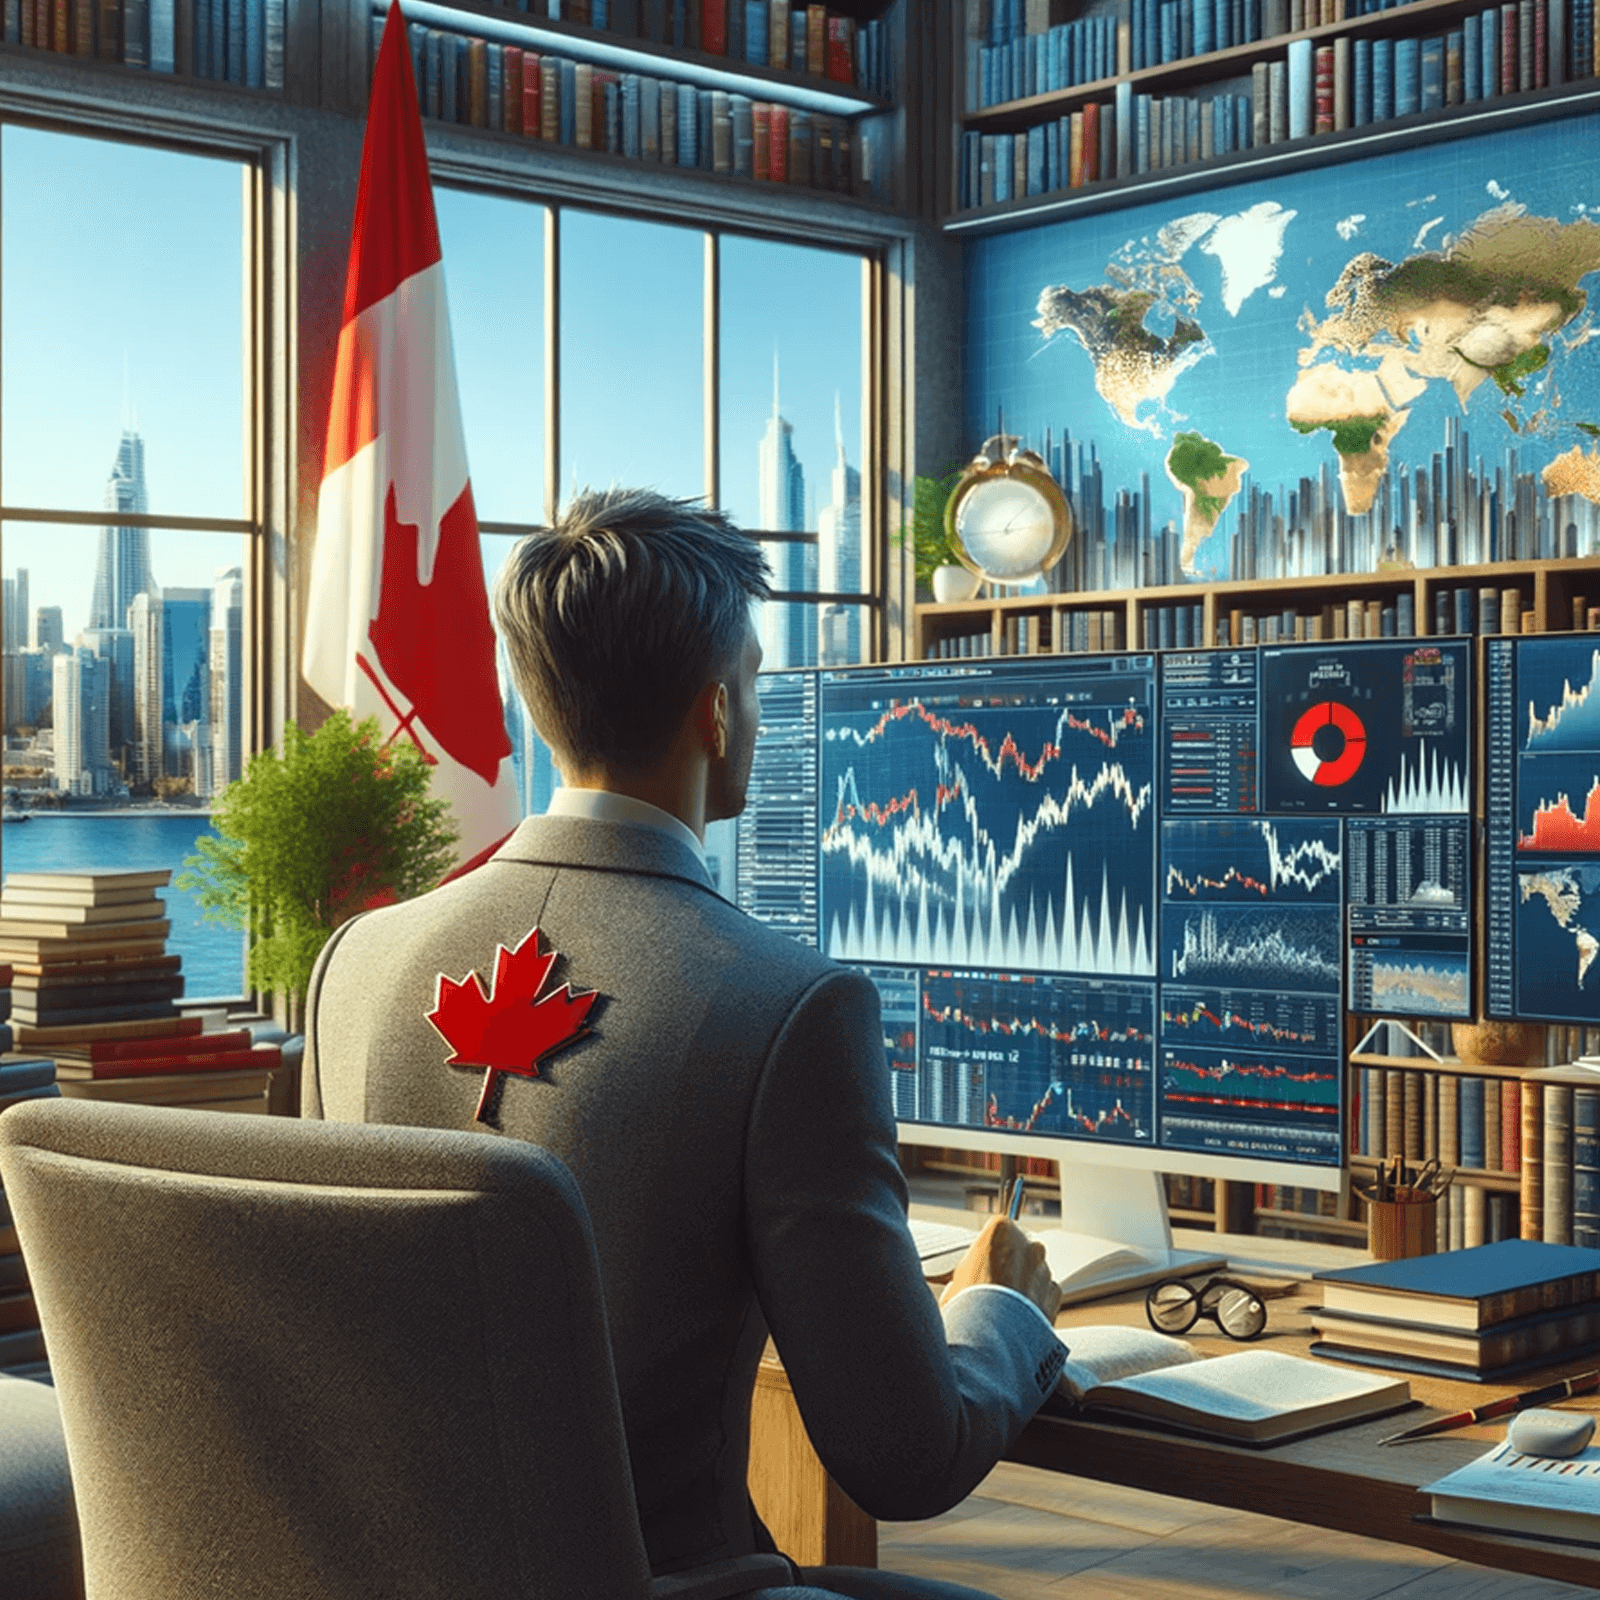 Canadian Investor contemplating his next market move